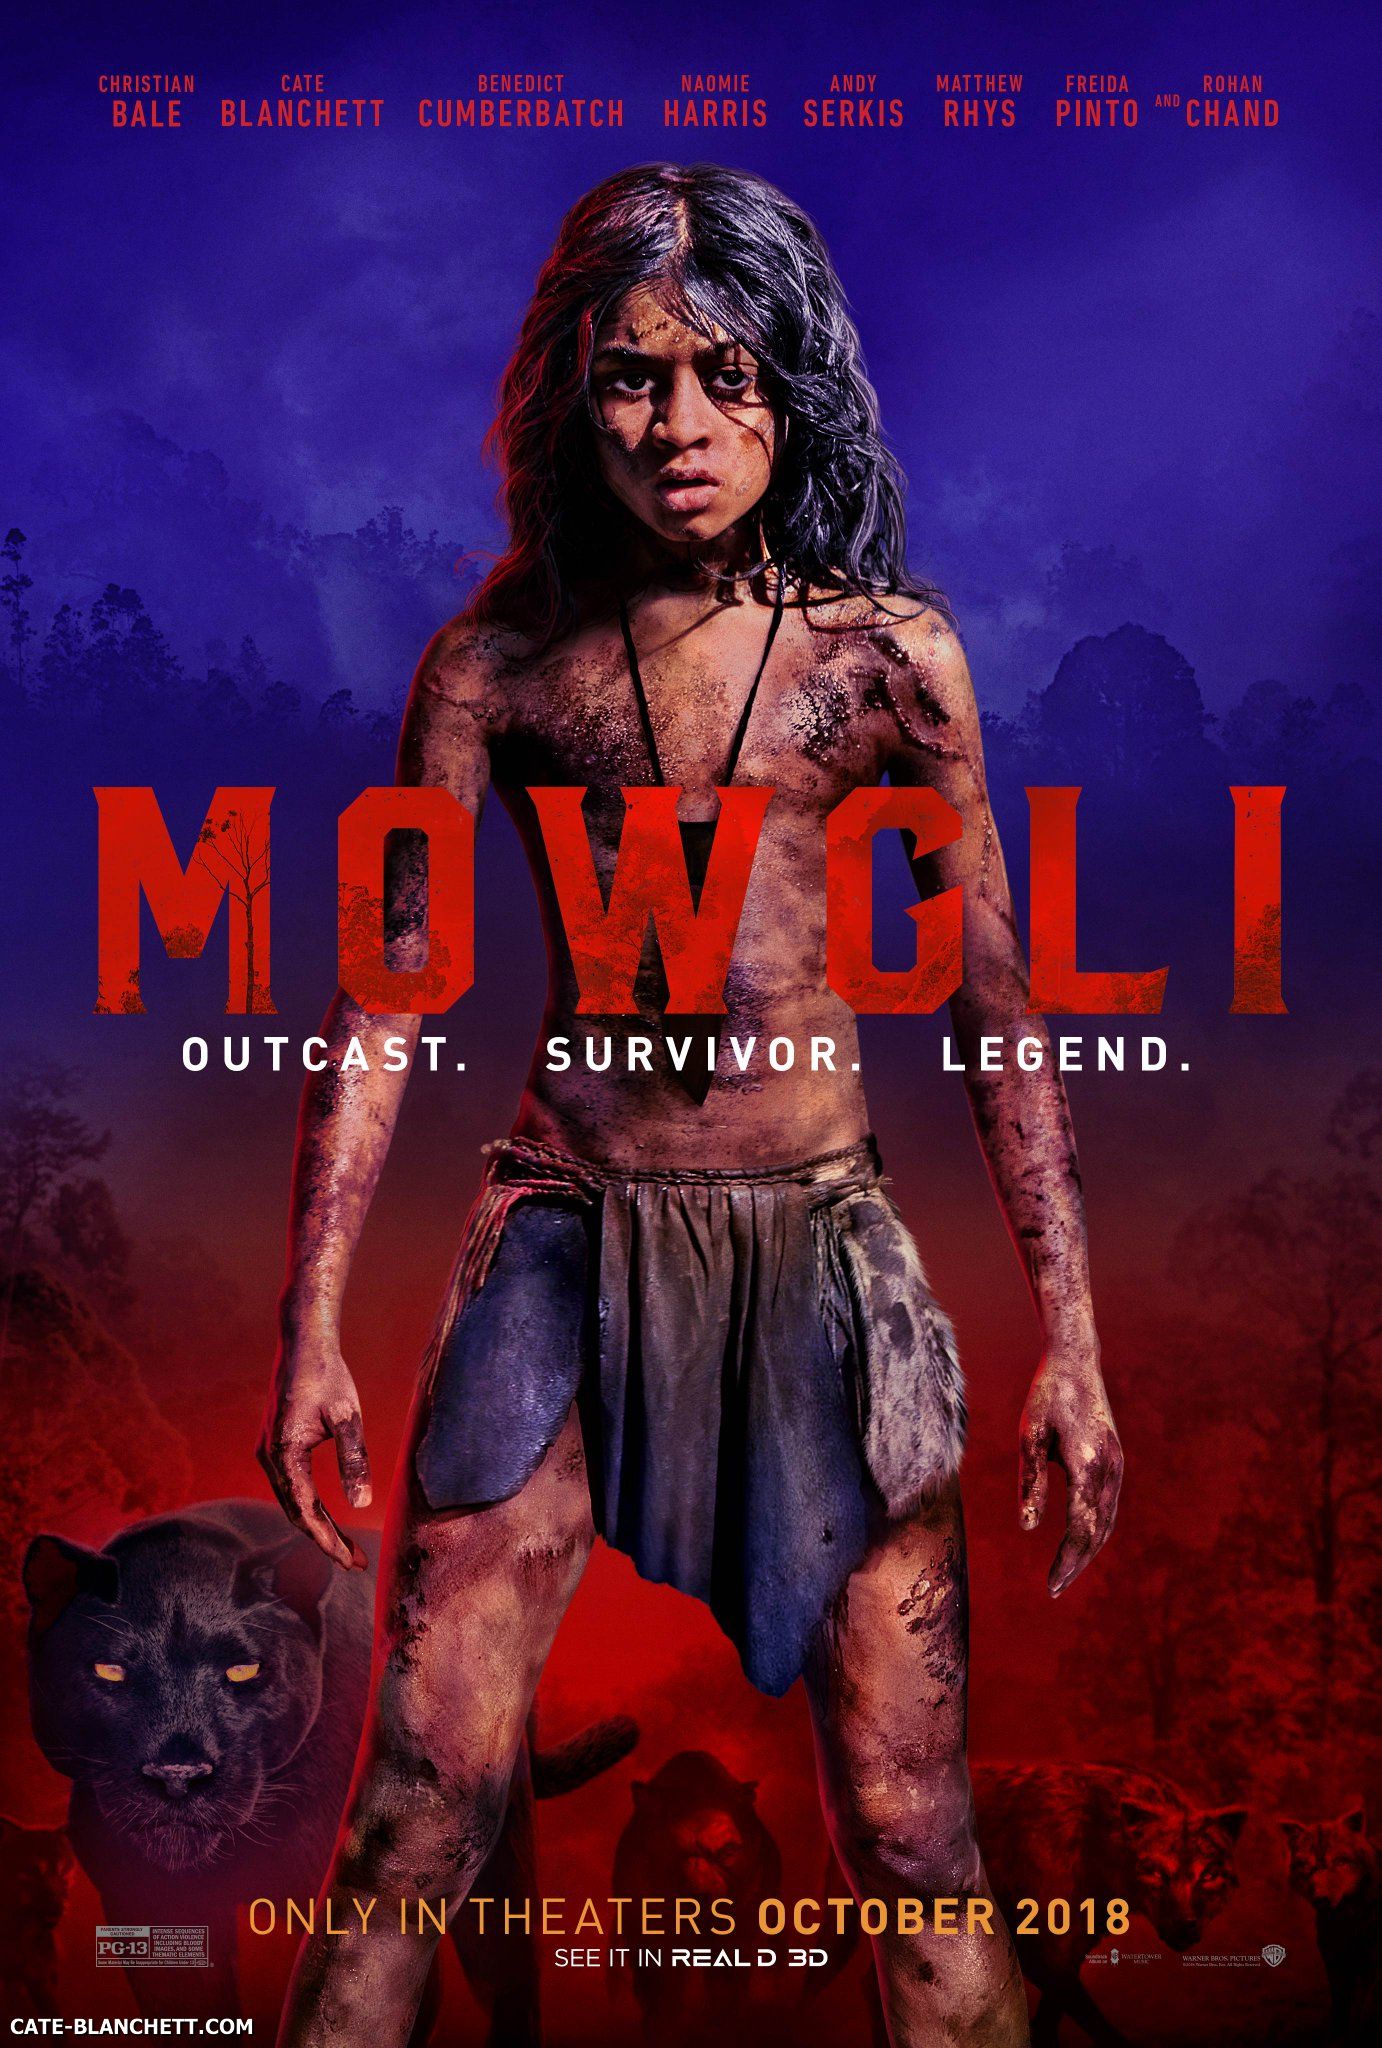 https://pictures.cate-blanchett.com/albums/films/2018%20Mowgli/Posters/001.jpg